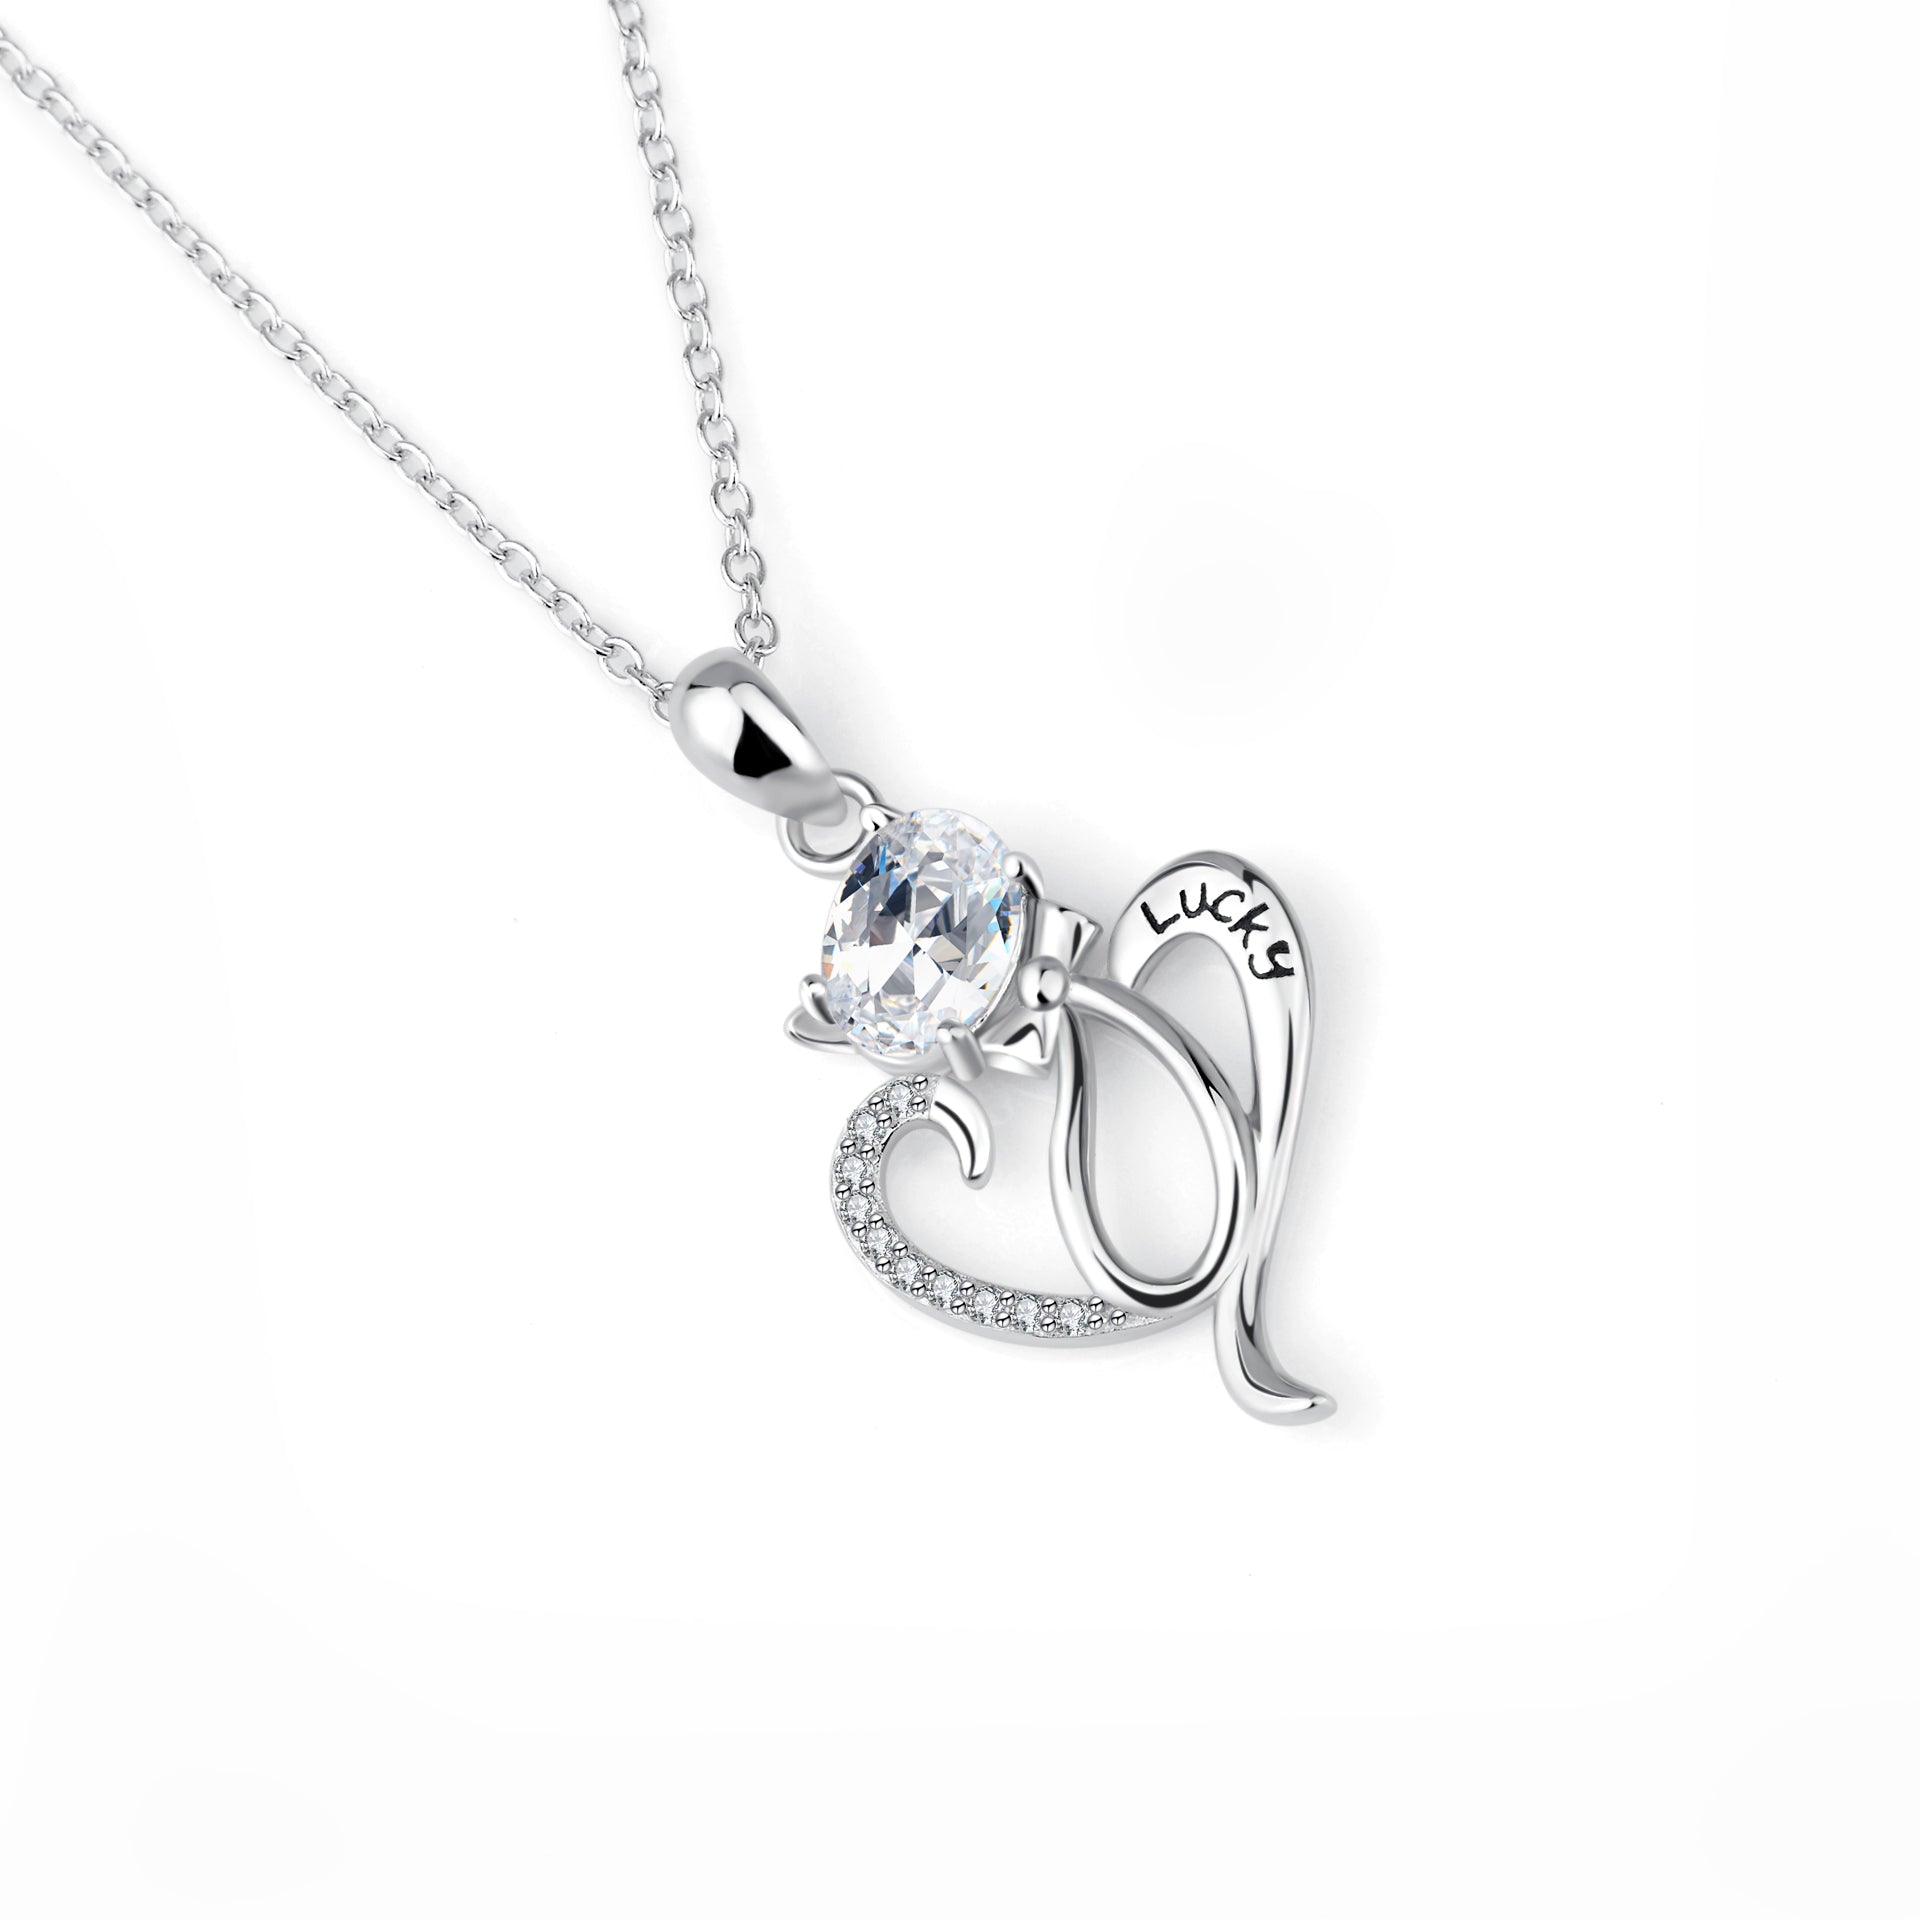 Wholesales Cat Necklace Love Silver Long Necklace Women Jewelry Heart Necklace